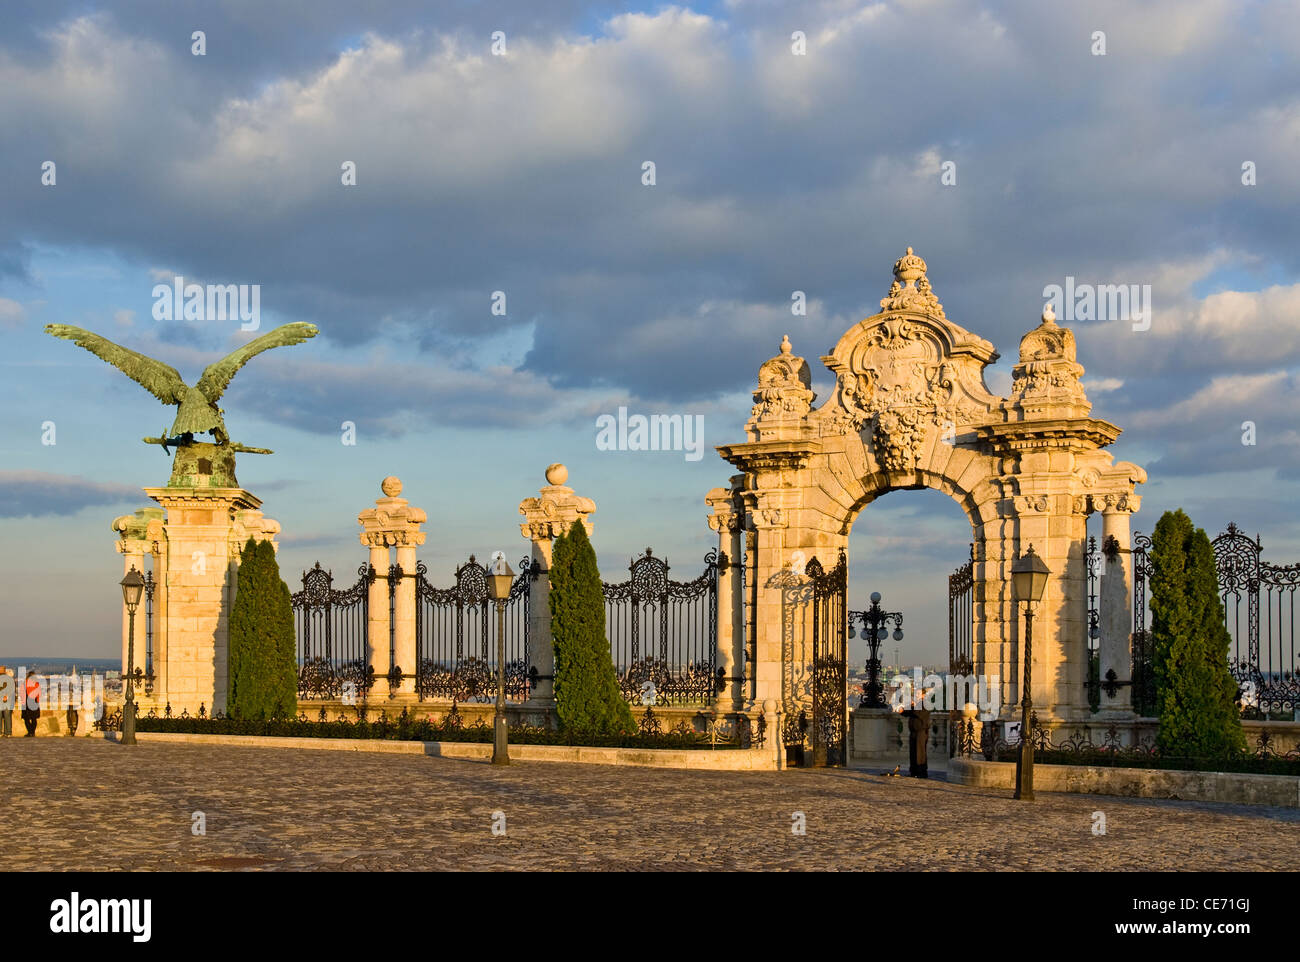 The Turul Bird Statue at the gate entrance to the Royal Palace, Castle Hill District (Varhegy), Buda, Budapest, Hungary. Stock Photo